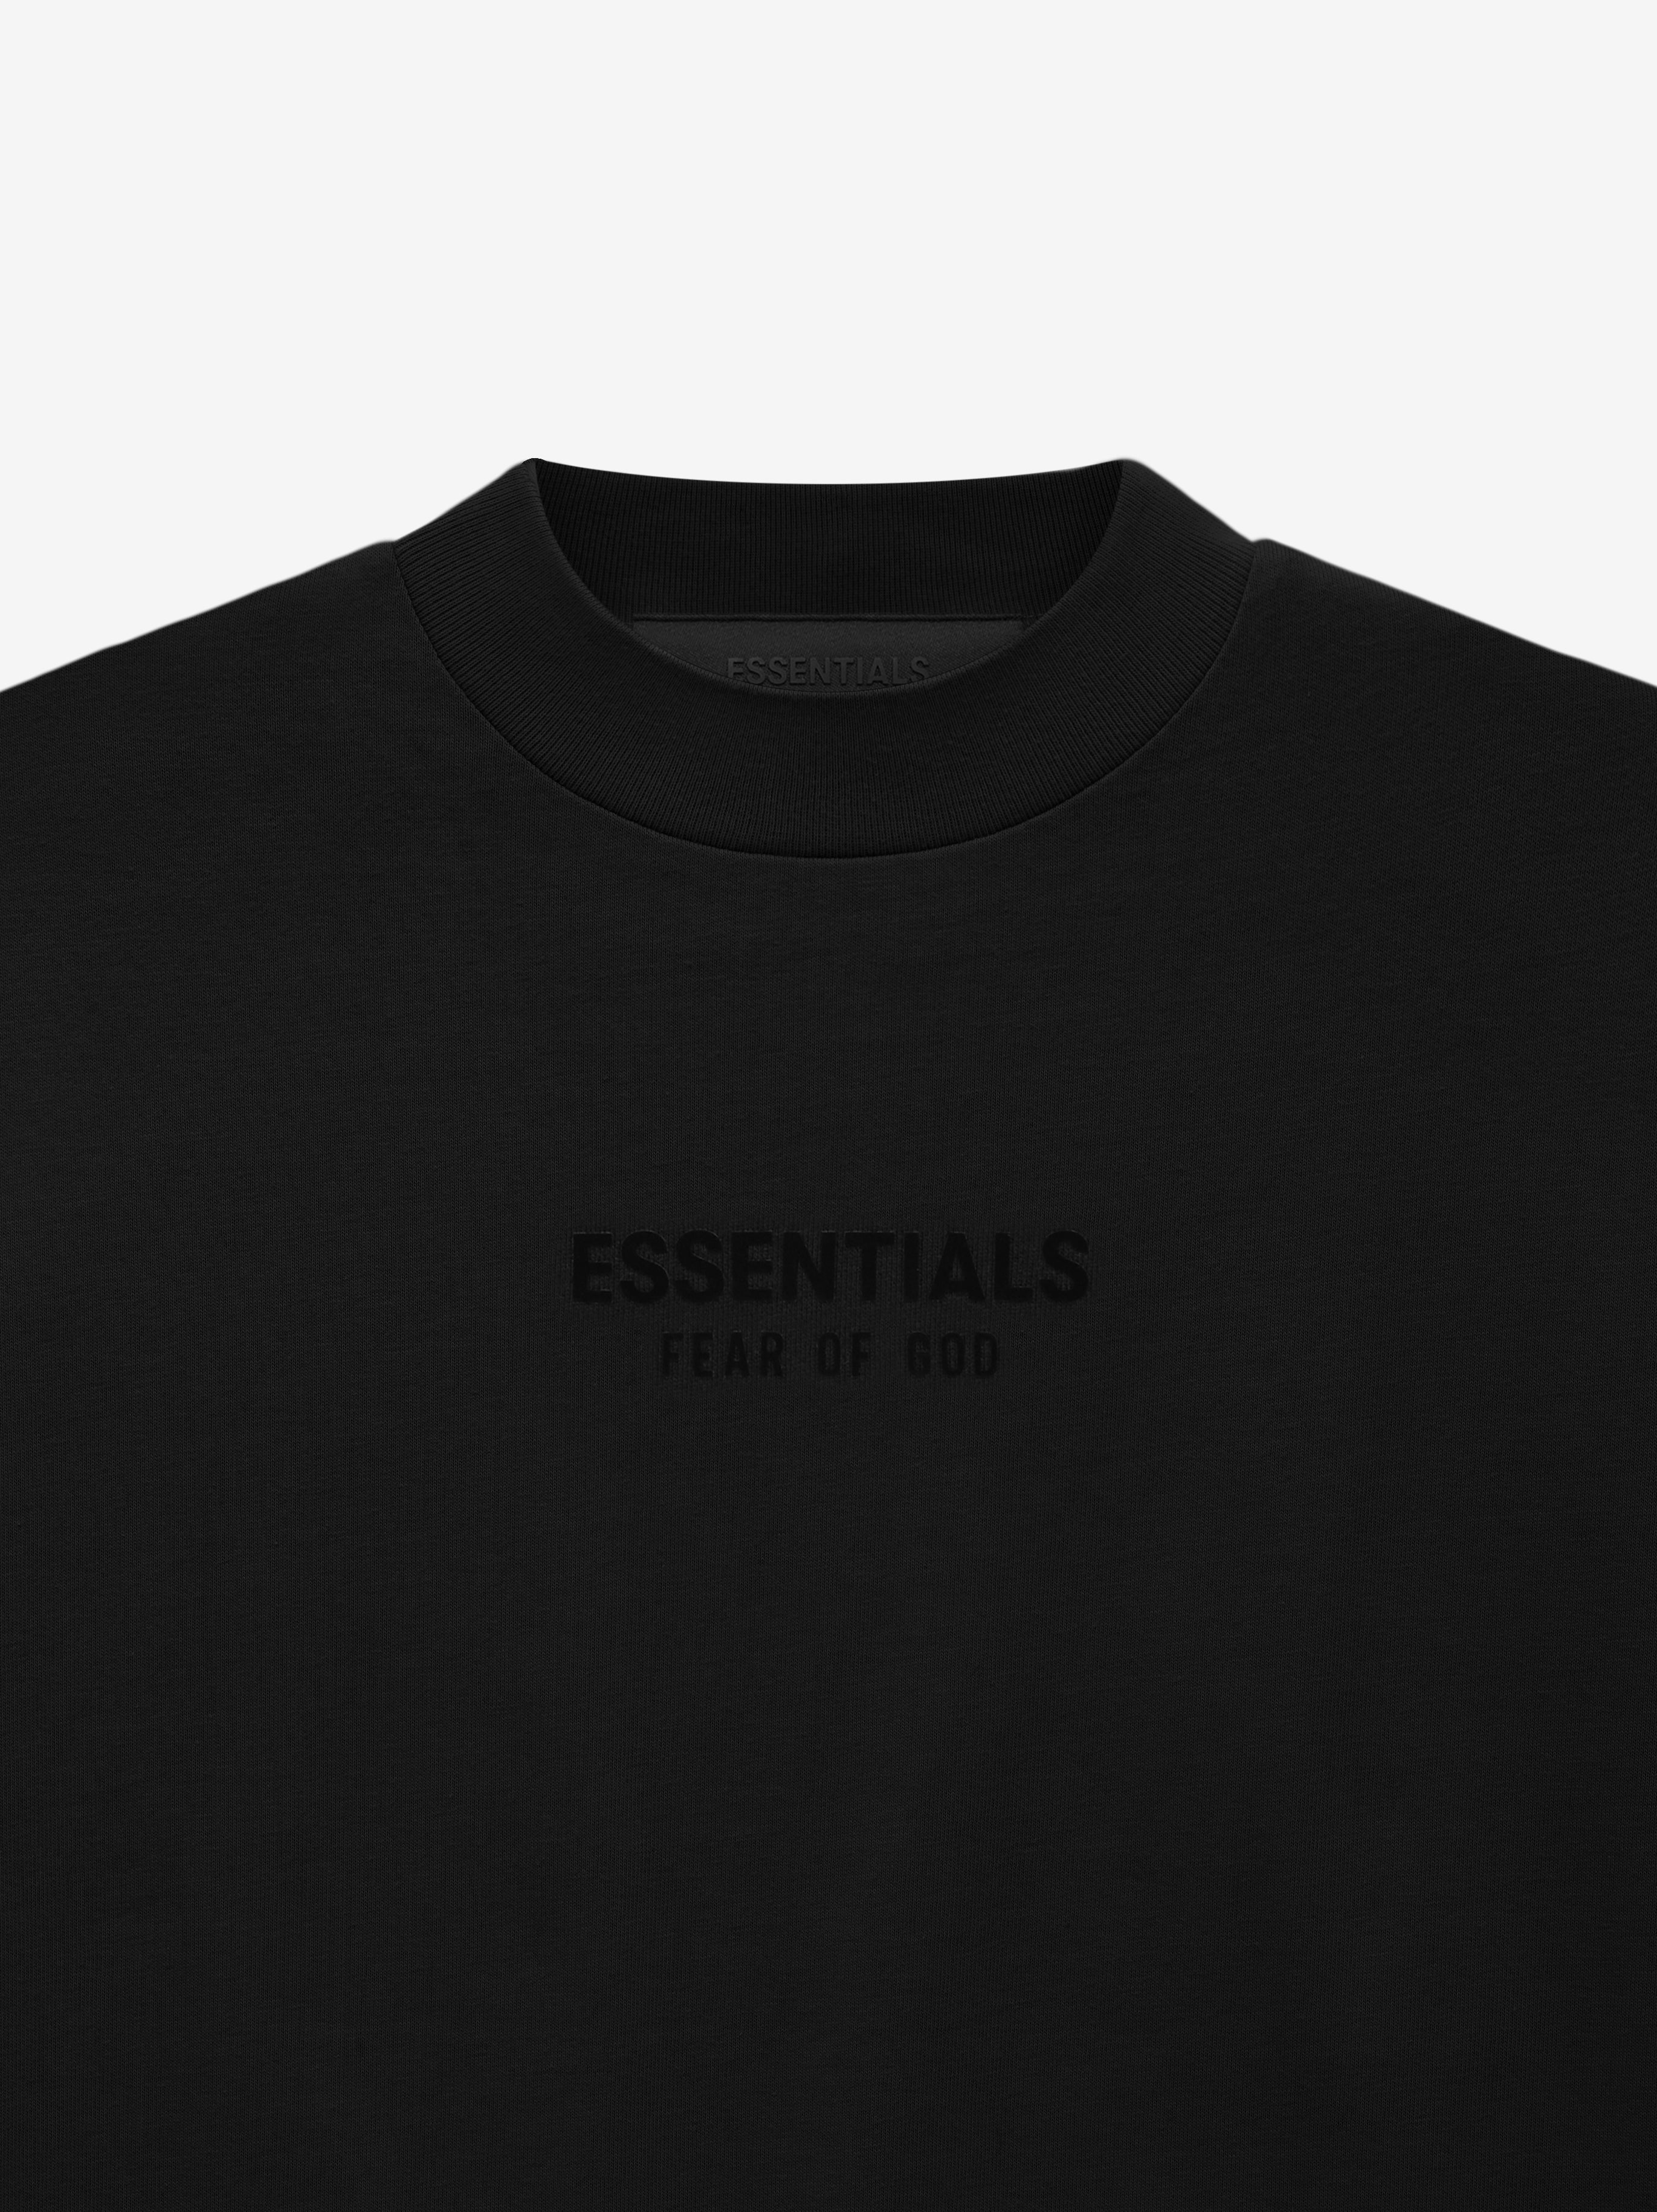 Mini Brands  Essential T-Shirt for Sale by joxjuenter